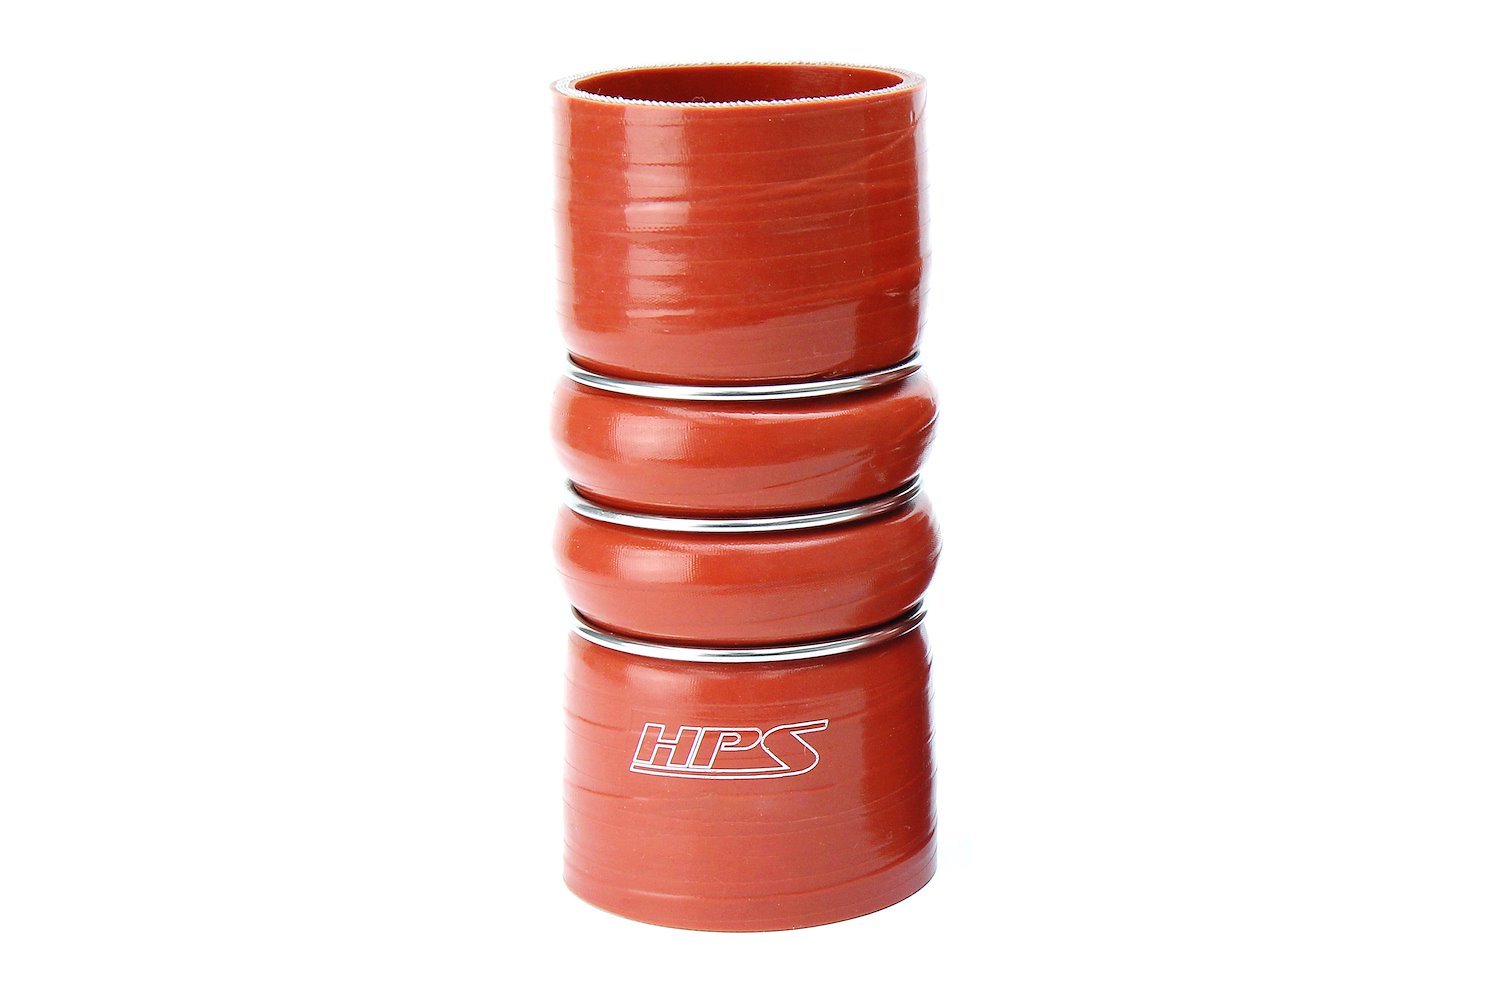 P8-CAC-600-HOT Silicone CAC Hump Hose Hot, High-Temp 8-Ply Aramid Reinforced, 6 in. ID, 6 in. Long